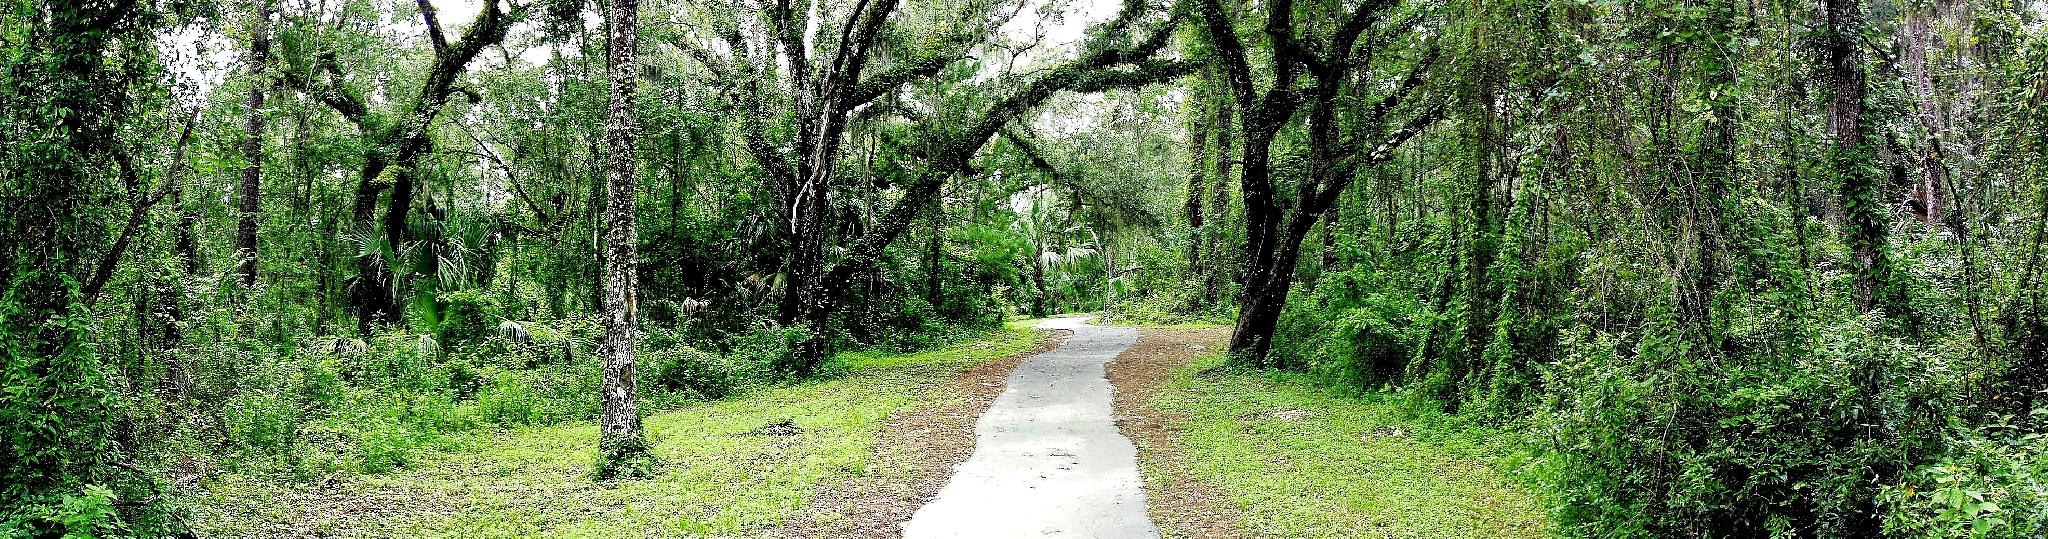 Over 2 miles of pristine walking and fitness trails